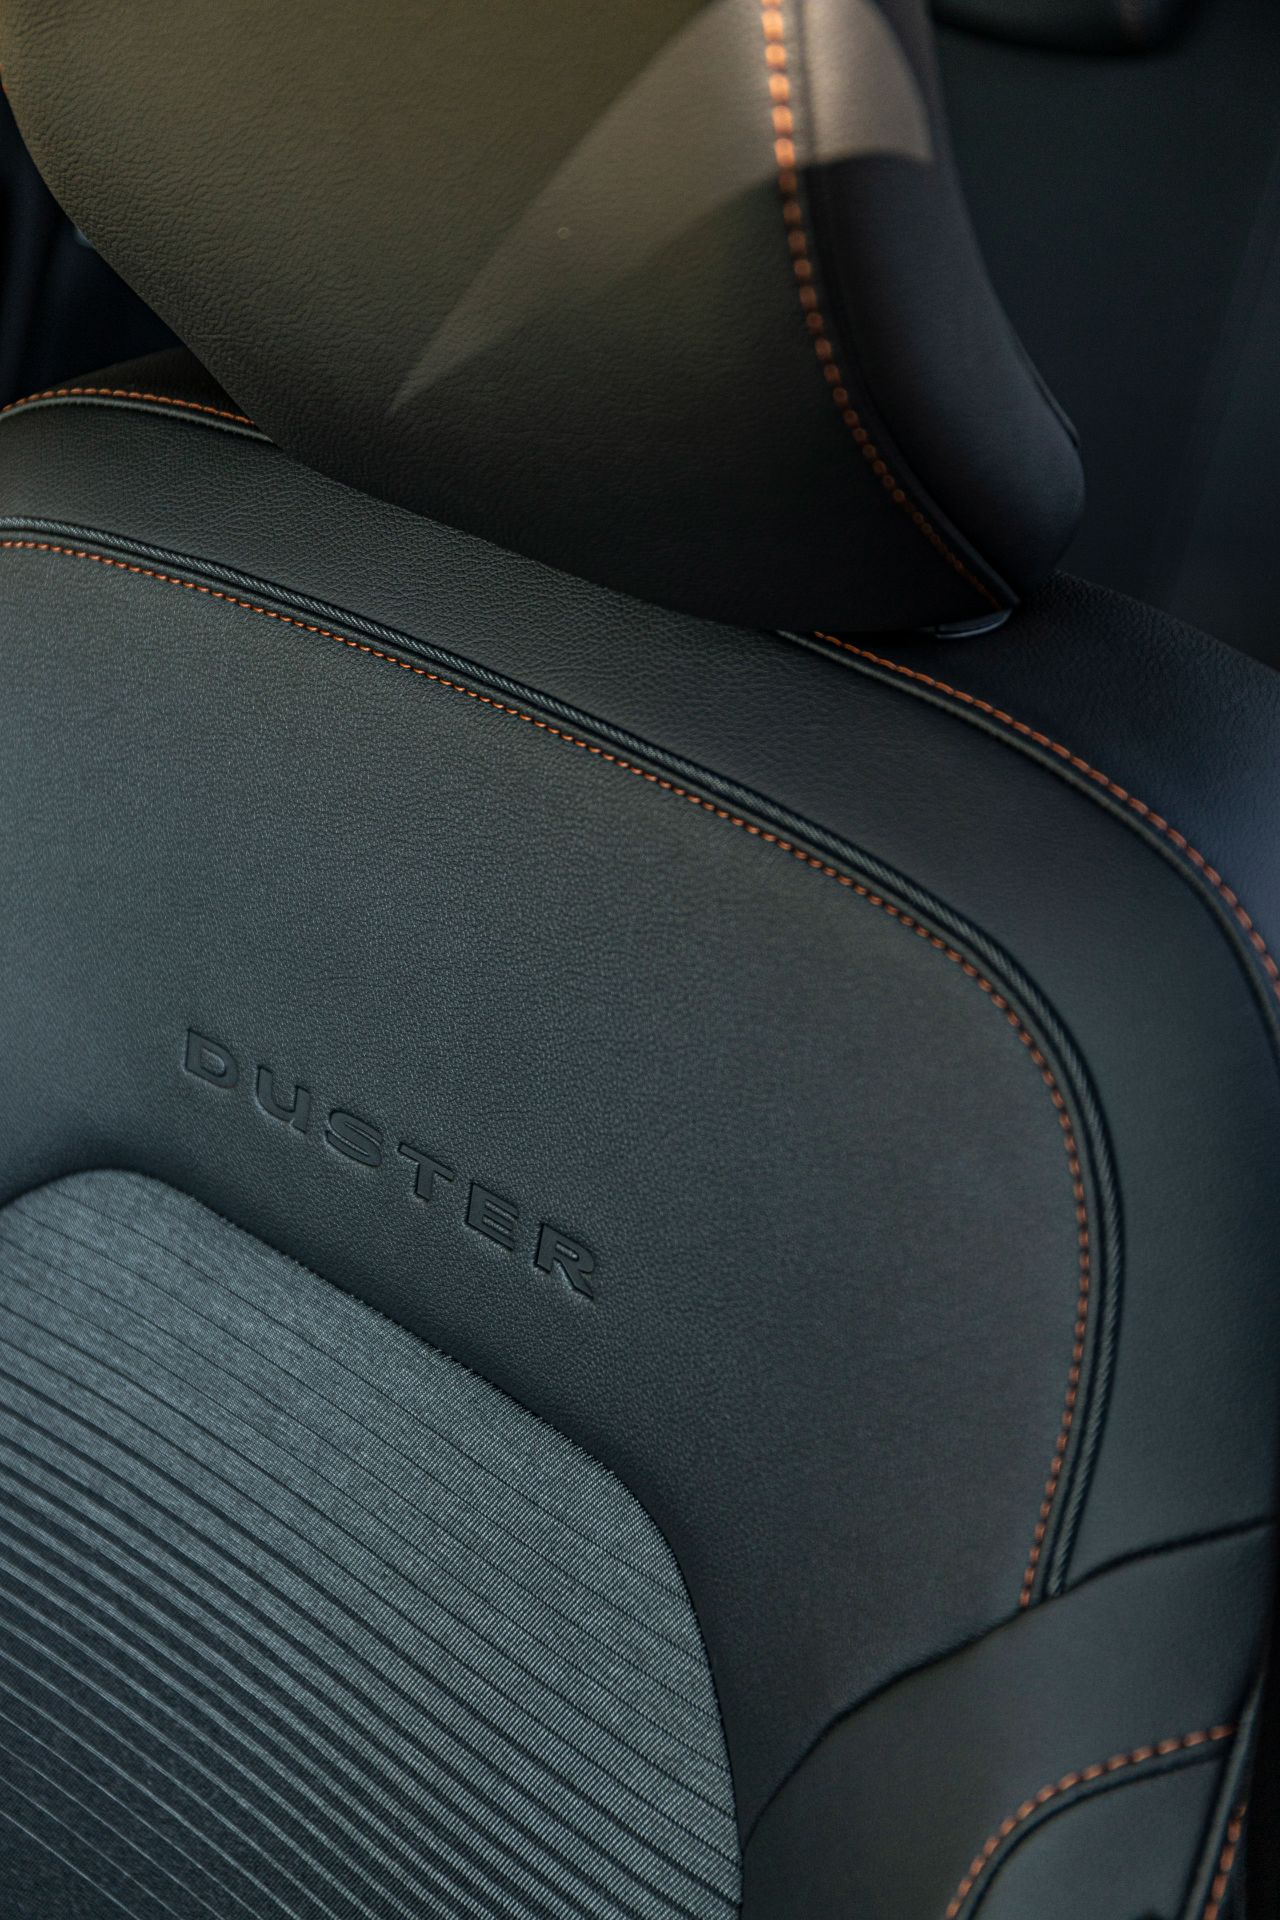 2022 Dacia Duster Extreme Interior Seats Wallpapers #42 of 42